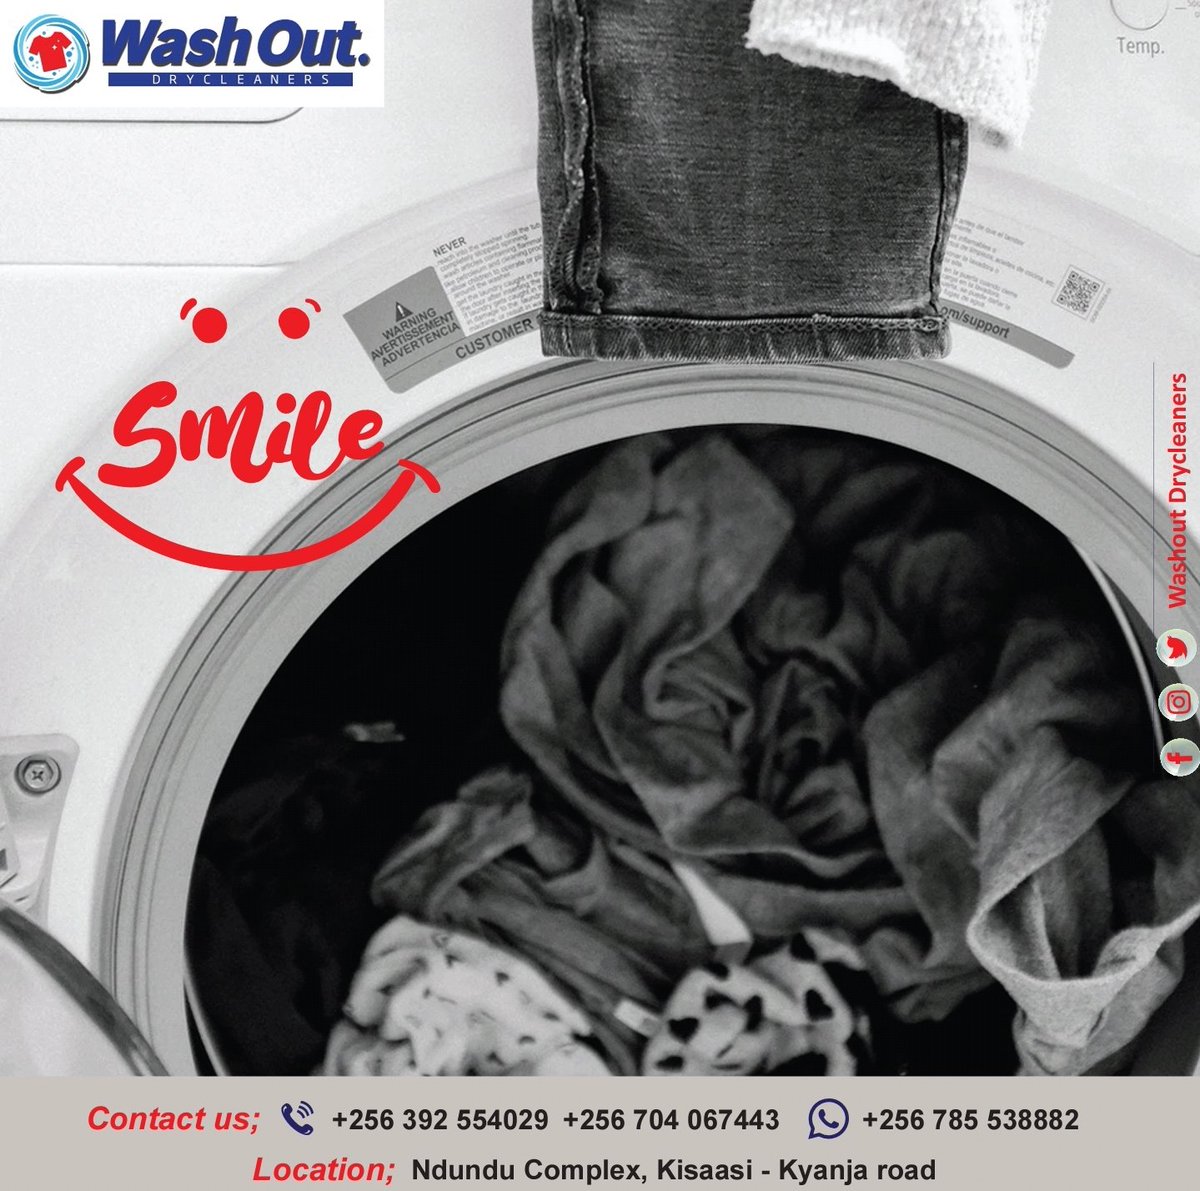 Laundry day doesn't have to be stressful.
#protectyourhealth #staysafe #washoutdrycleaners #washout #drycleaners #laundryday